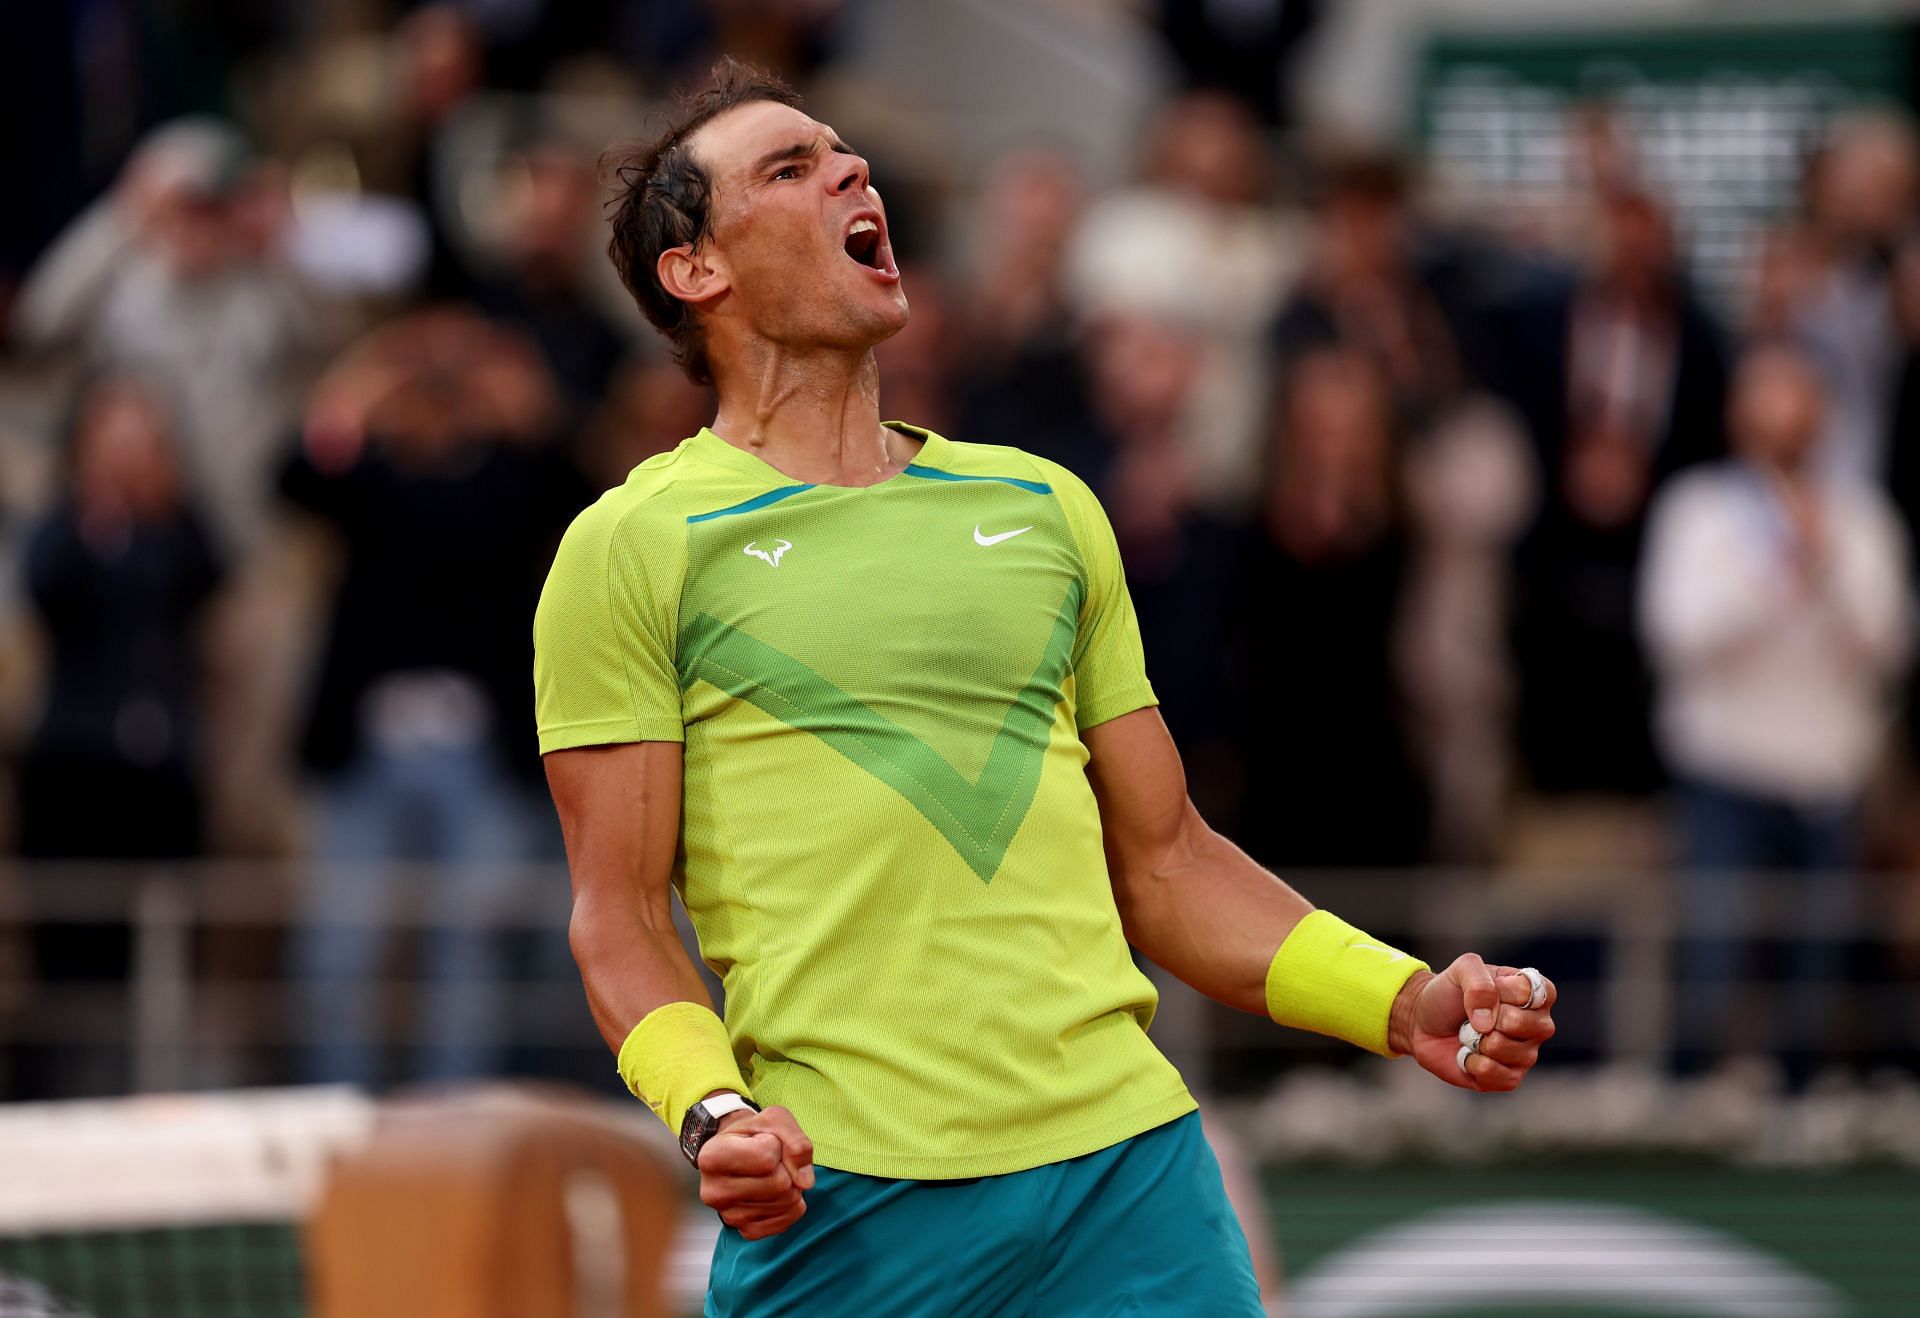 Rafael Nadal reacts after reaching the quarterfinals of French Open 2022